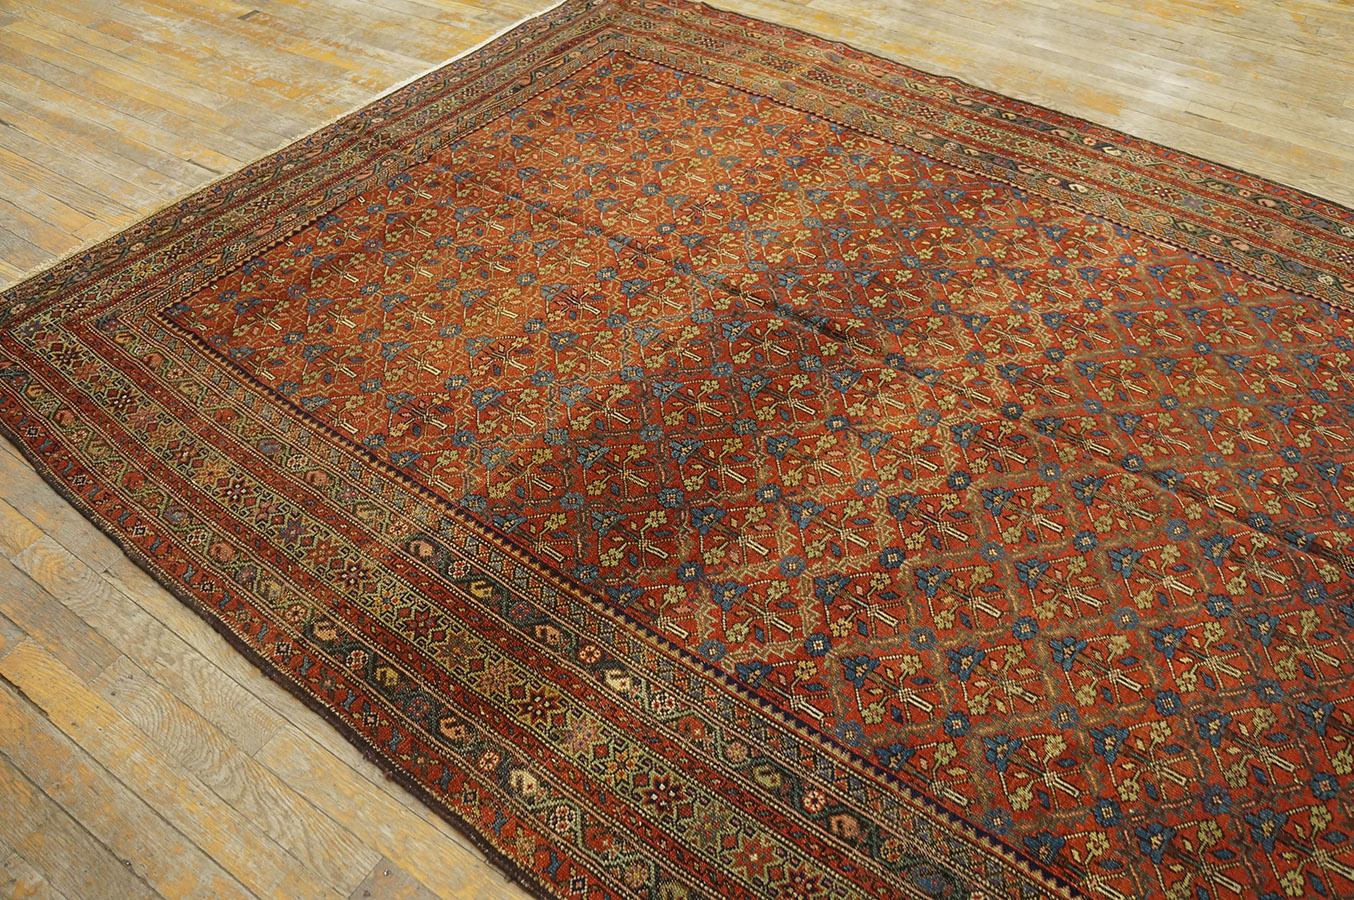 Early 20th Century N.W. Persian Gallery Carpet ( 6' x 13' - 183 x 396 ) For Sale 2